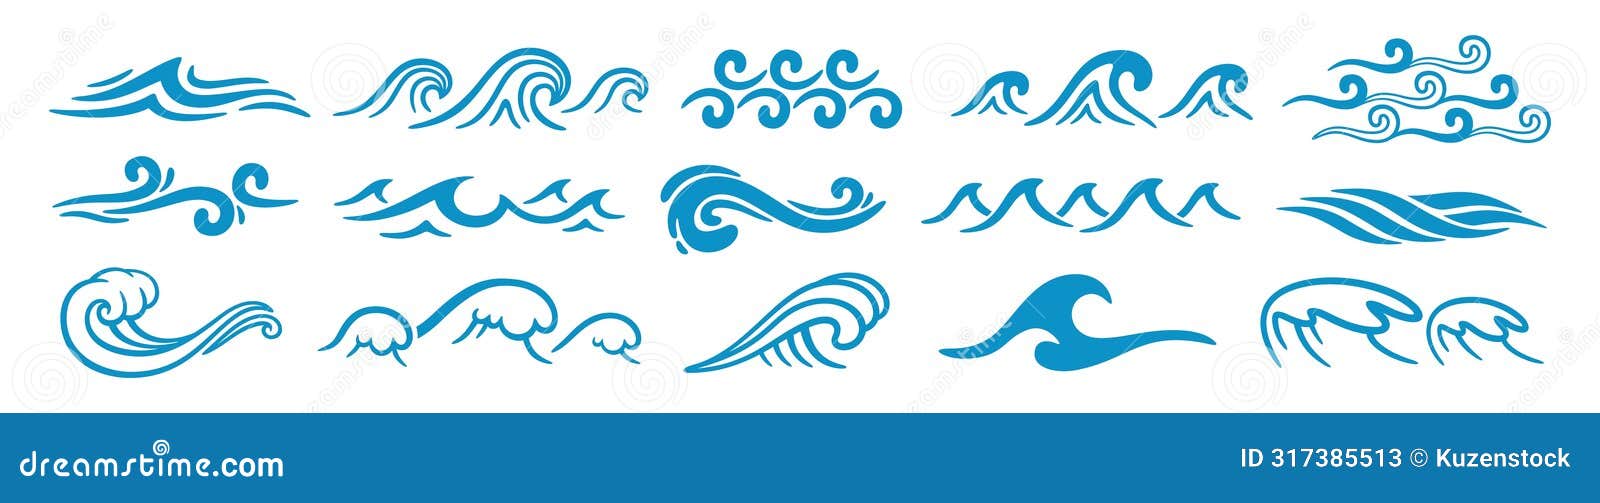 abstract sea waves. ocean silhouette aqua curlicues, ripples, curls, splashes. turquoise and blue water marine icons for